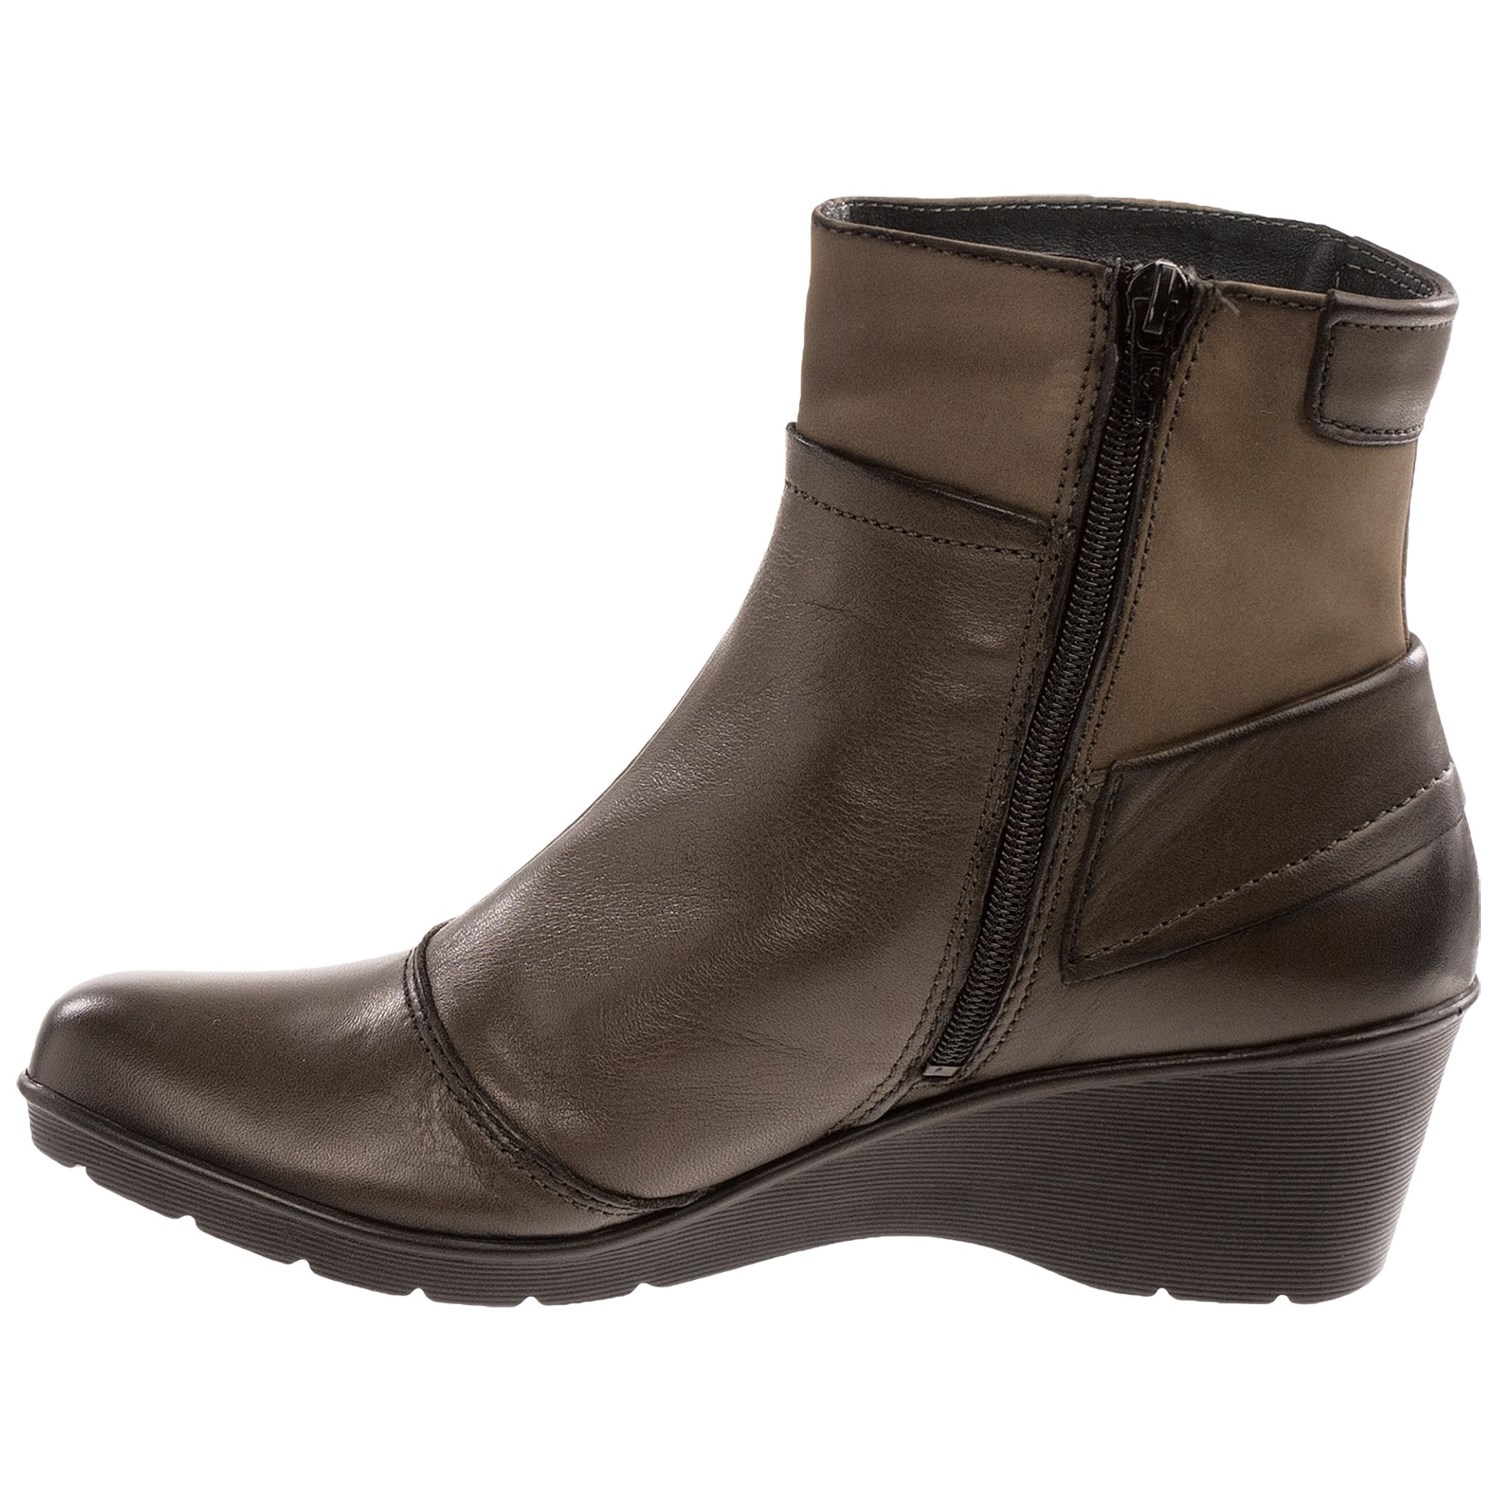 Taos Footwear Happening Ankle Boots (For Women) 7338A - Save 64%